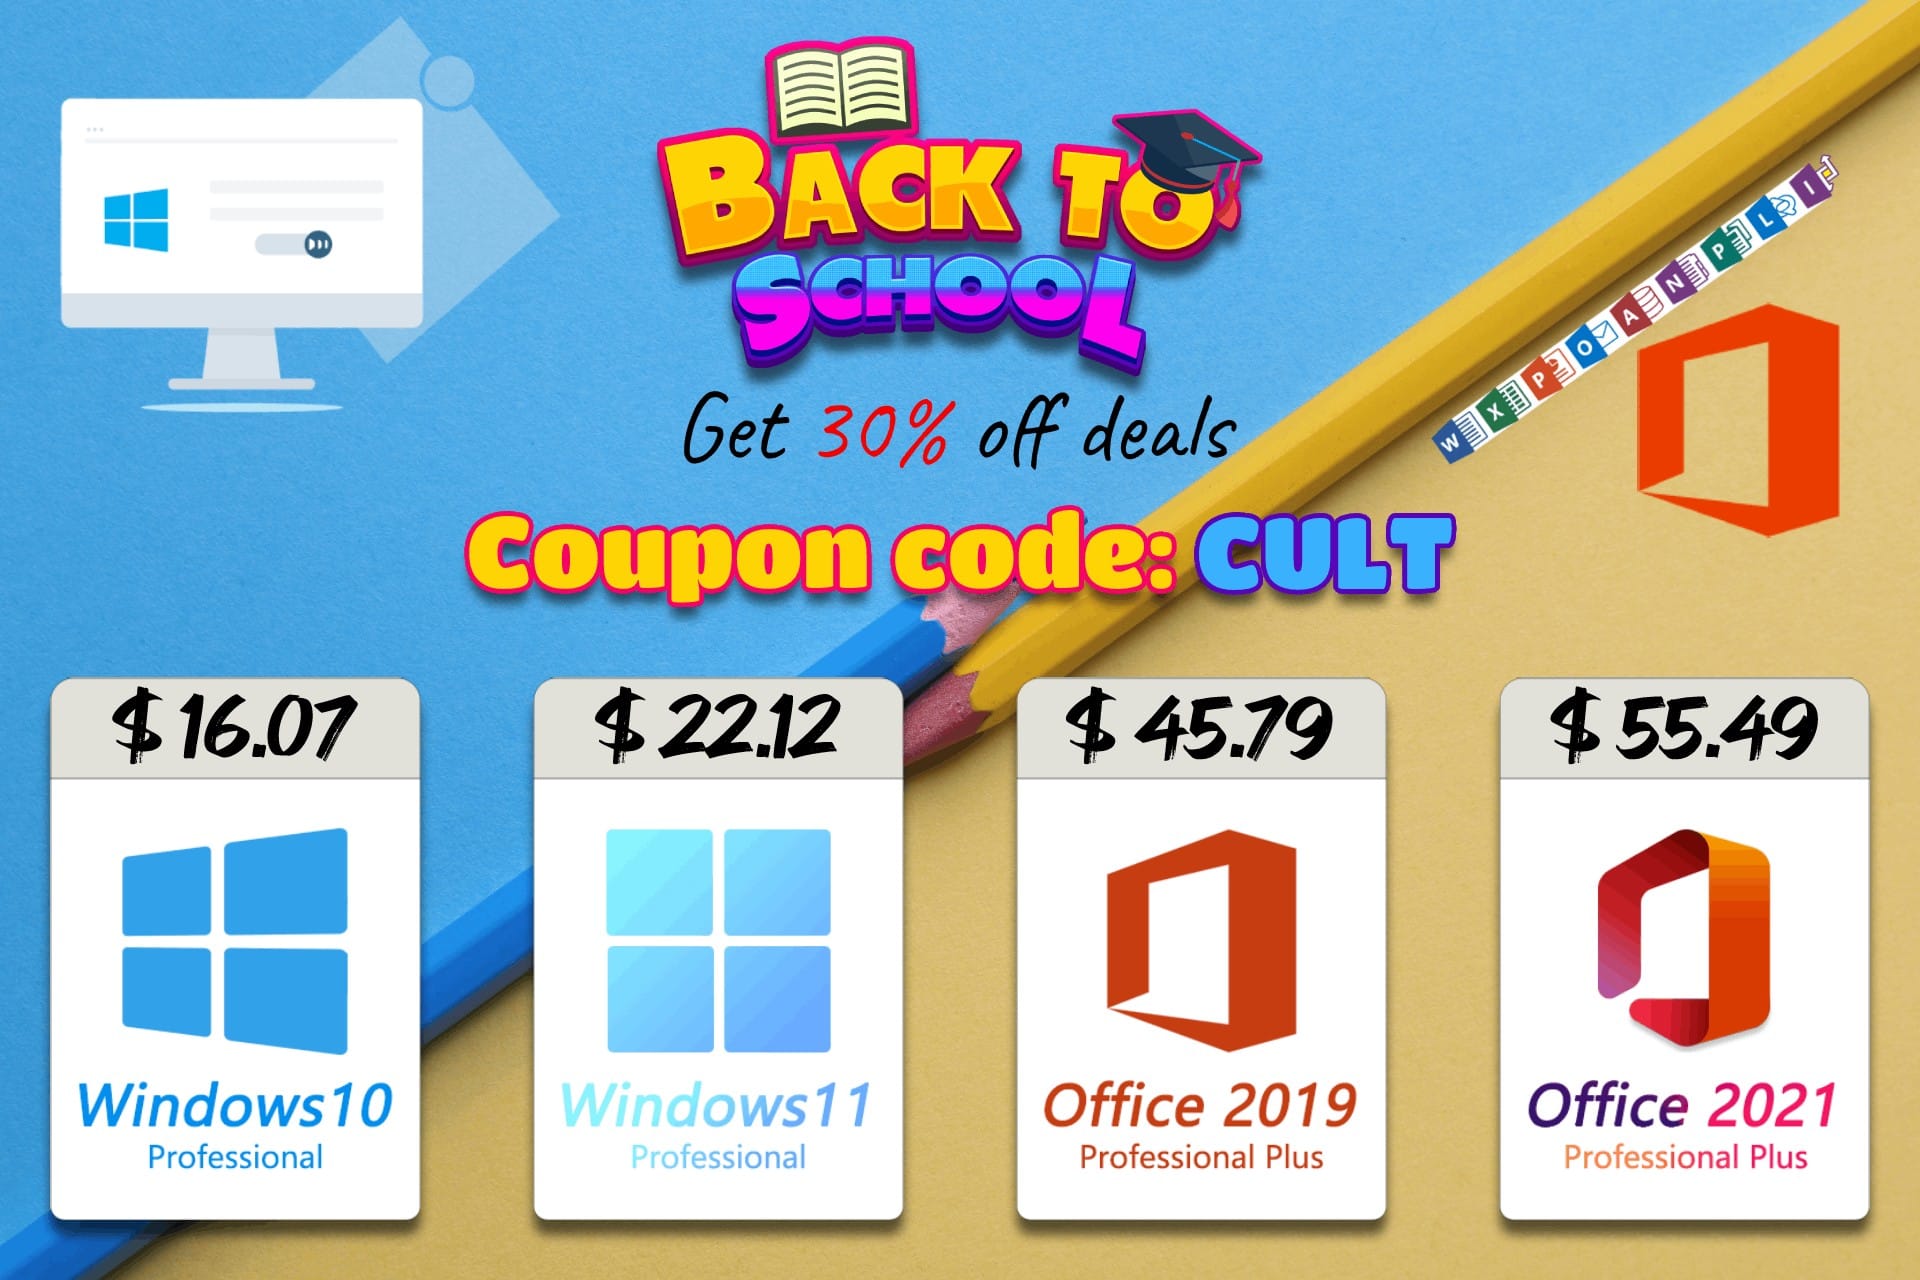 In CDKeylord's Back to School Sale, you can get 30% off with coupon code CULT.